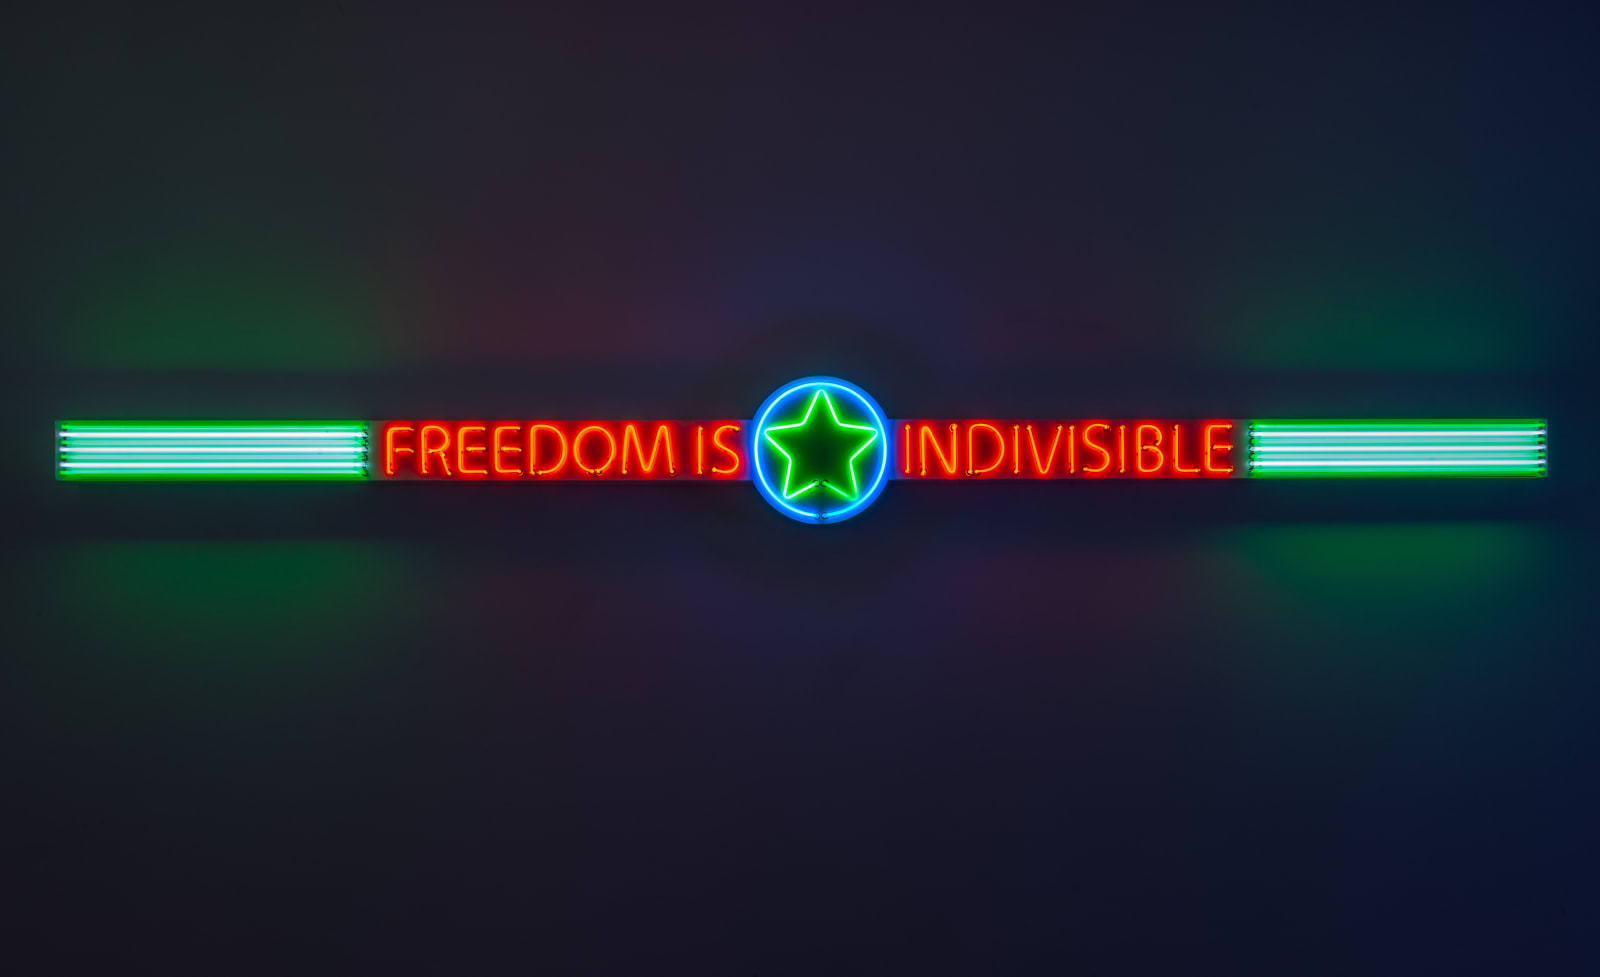 FREEDOM IS INDEVISIBLE, 2019